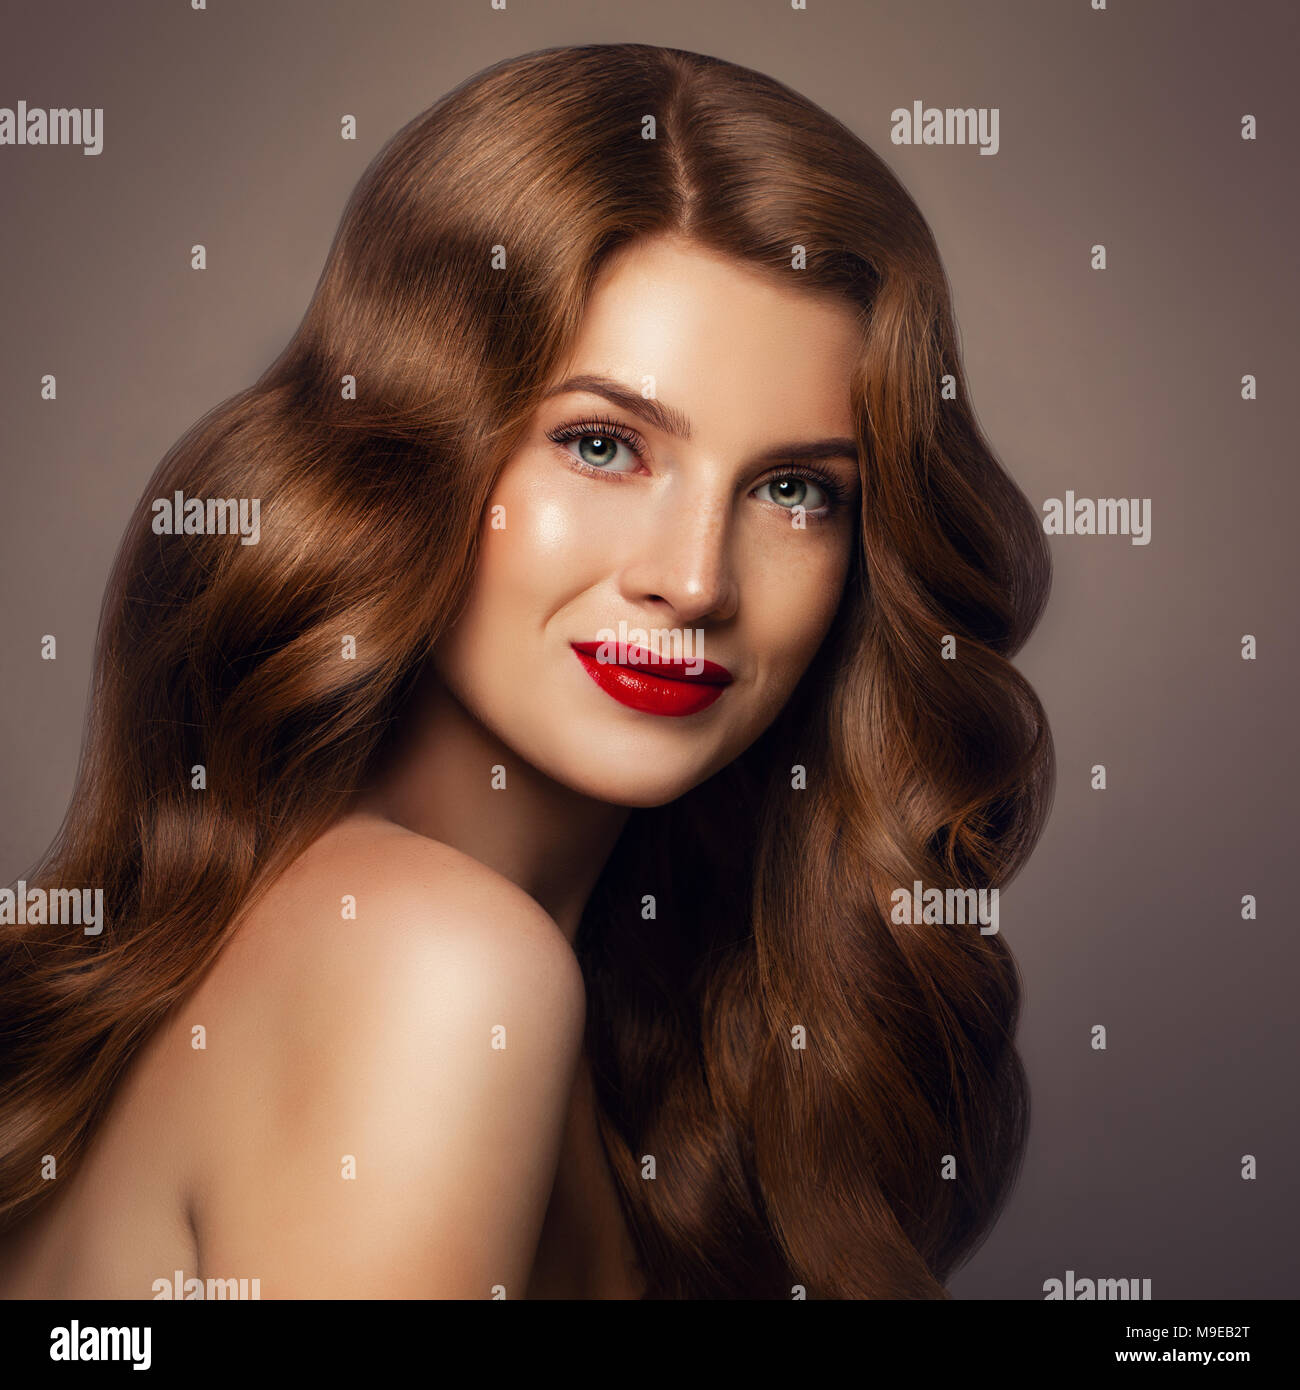 Beauty Portrait of Redhead Fashion Model Woman with Long Hair. Stylish Lady with Perfect Hairstyle Stock Photo